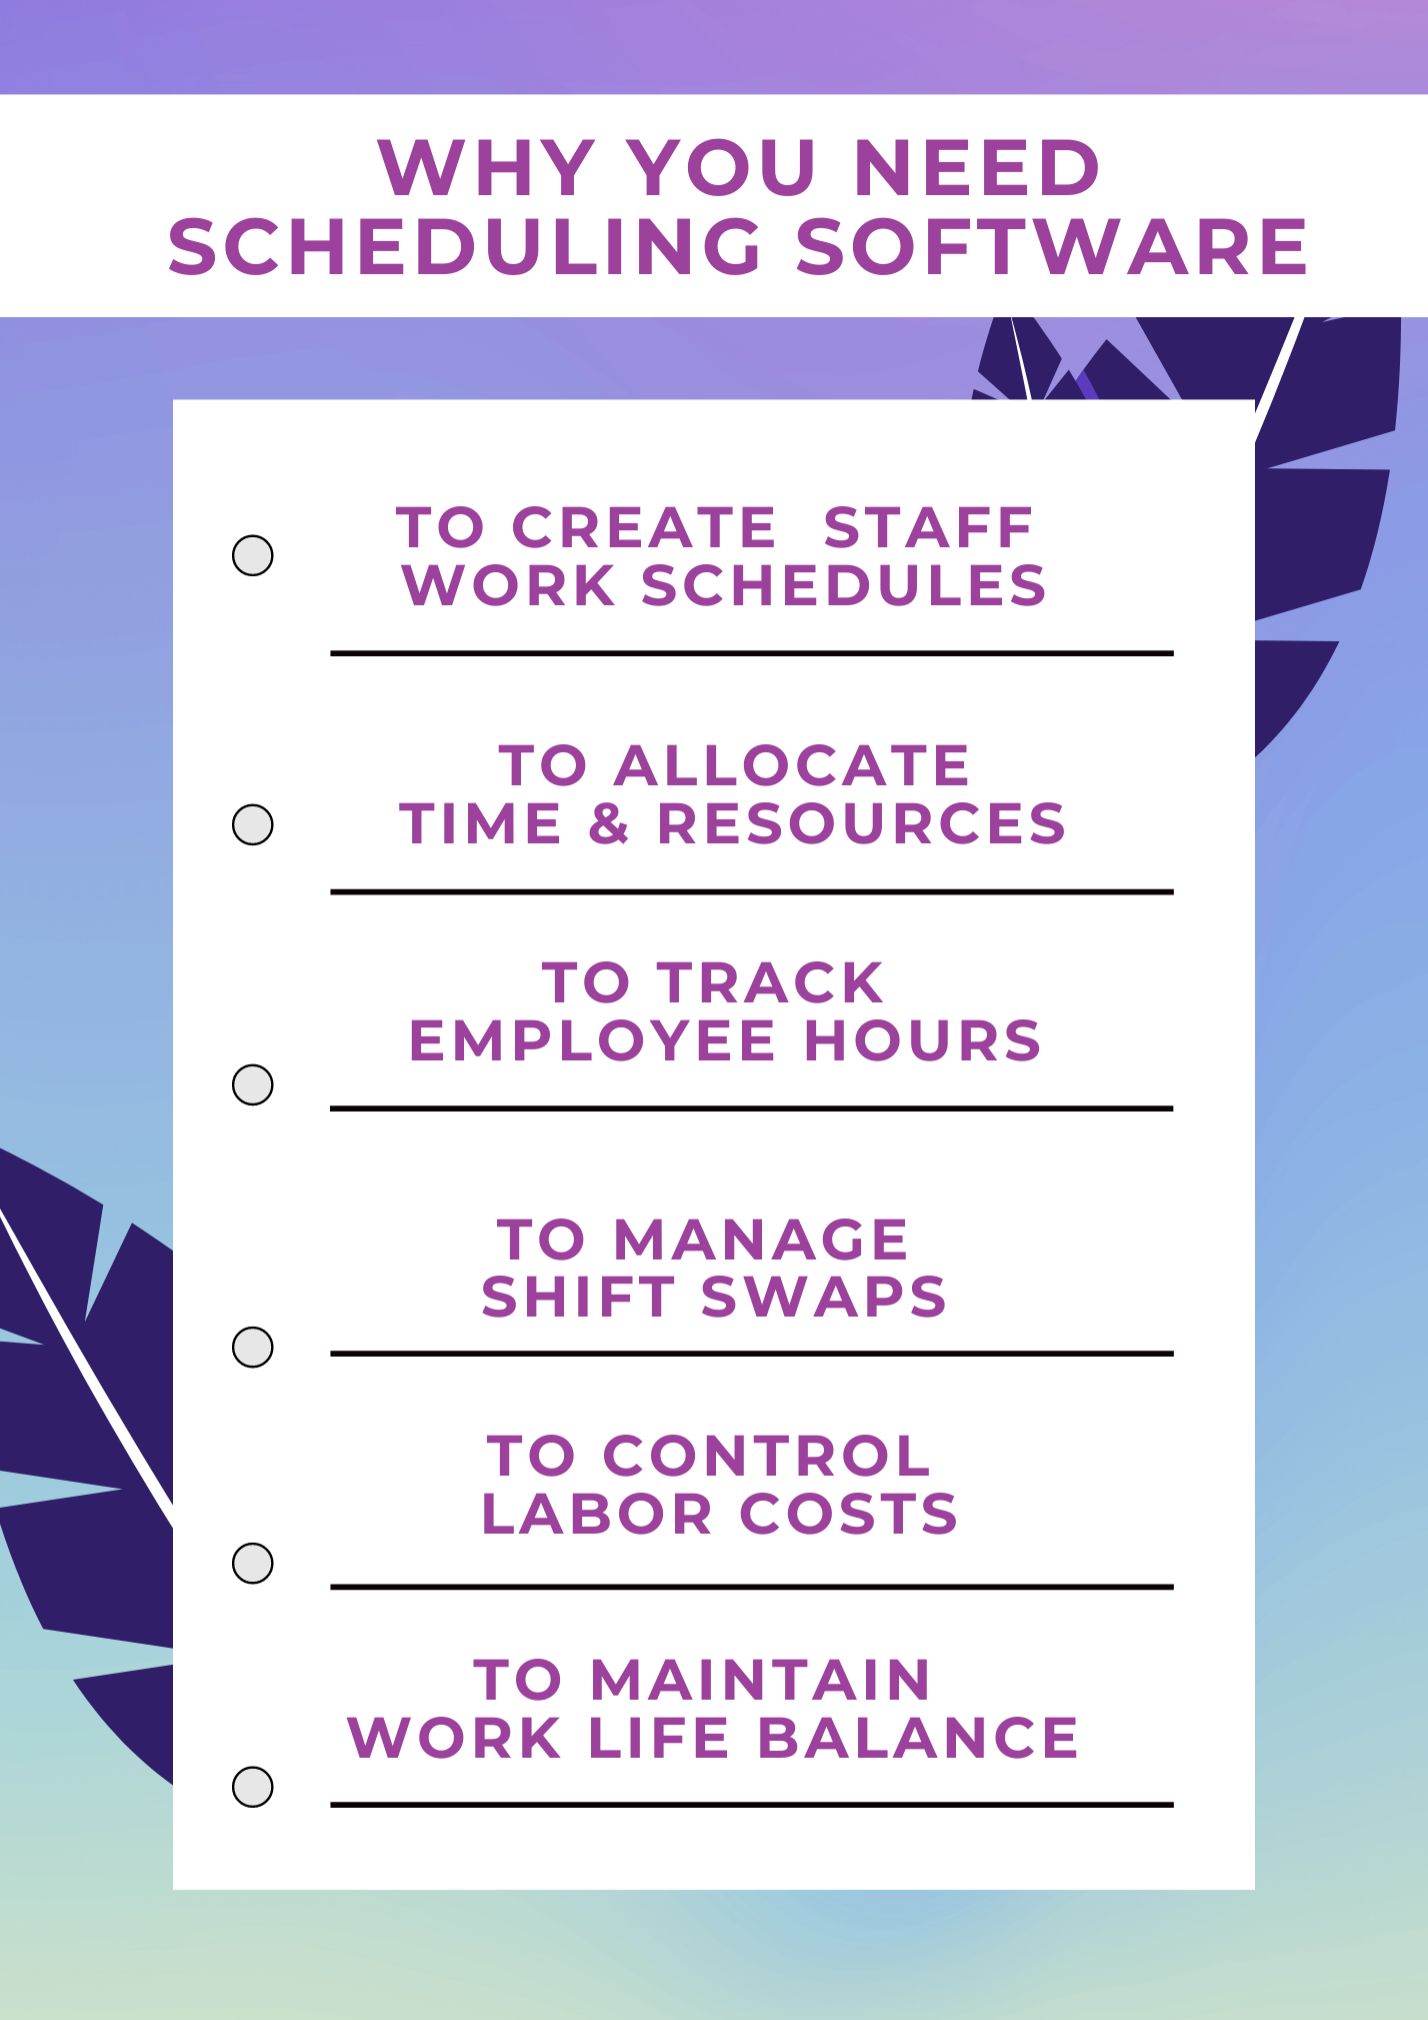 list of reasons for having scheduling software - a list of bullet points on the blue background